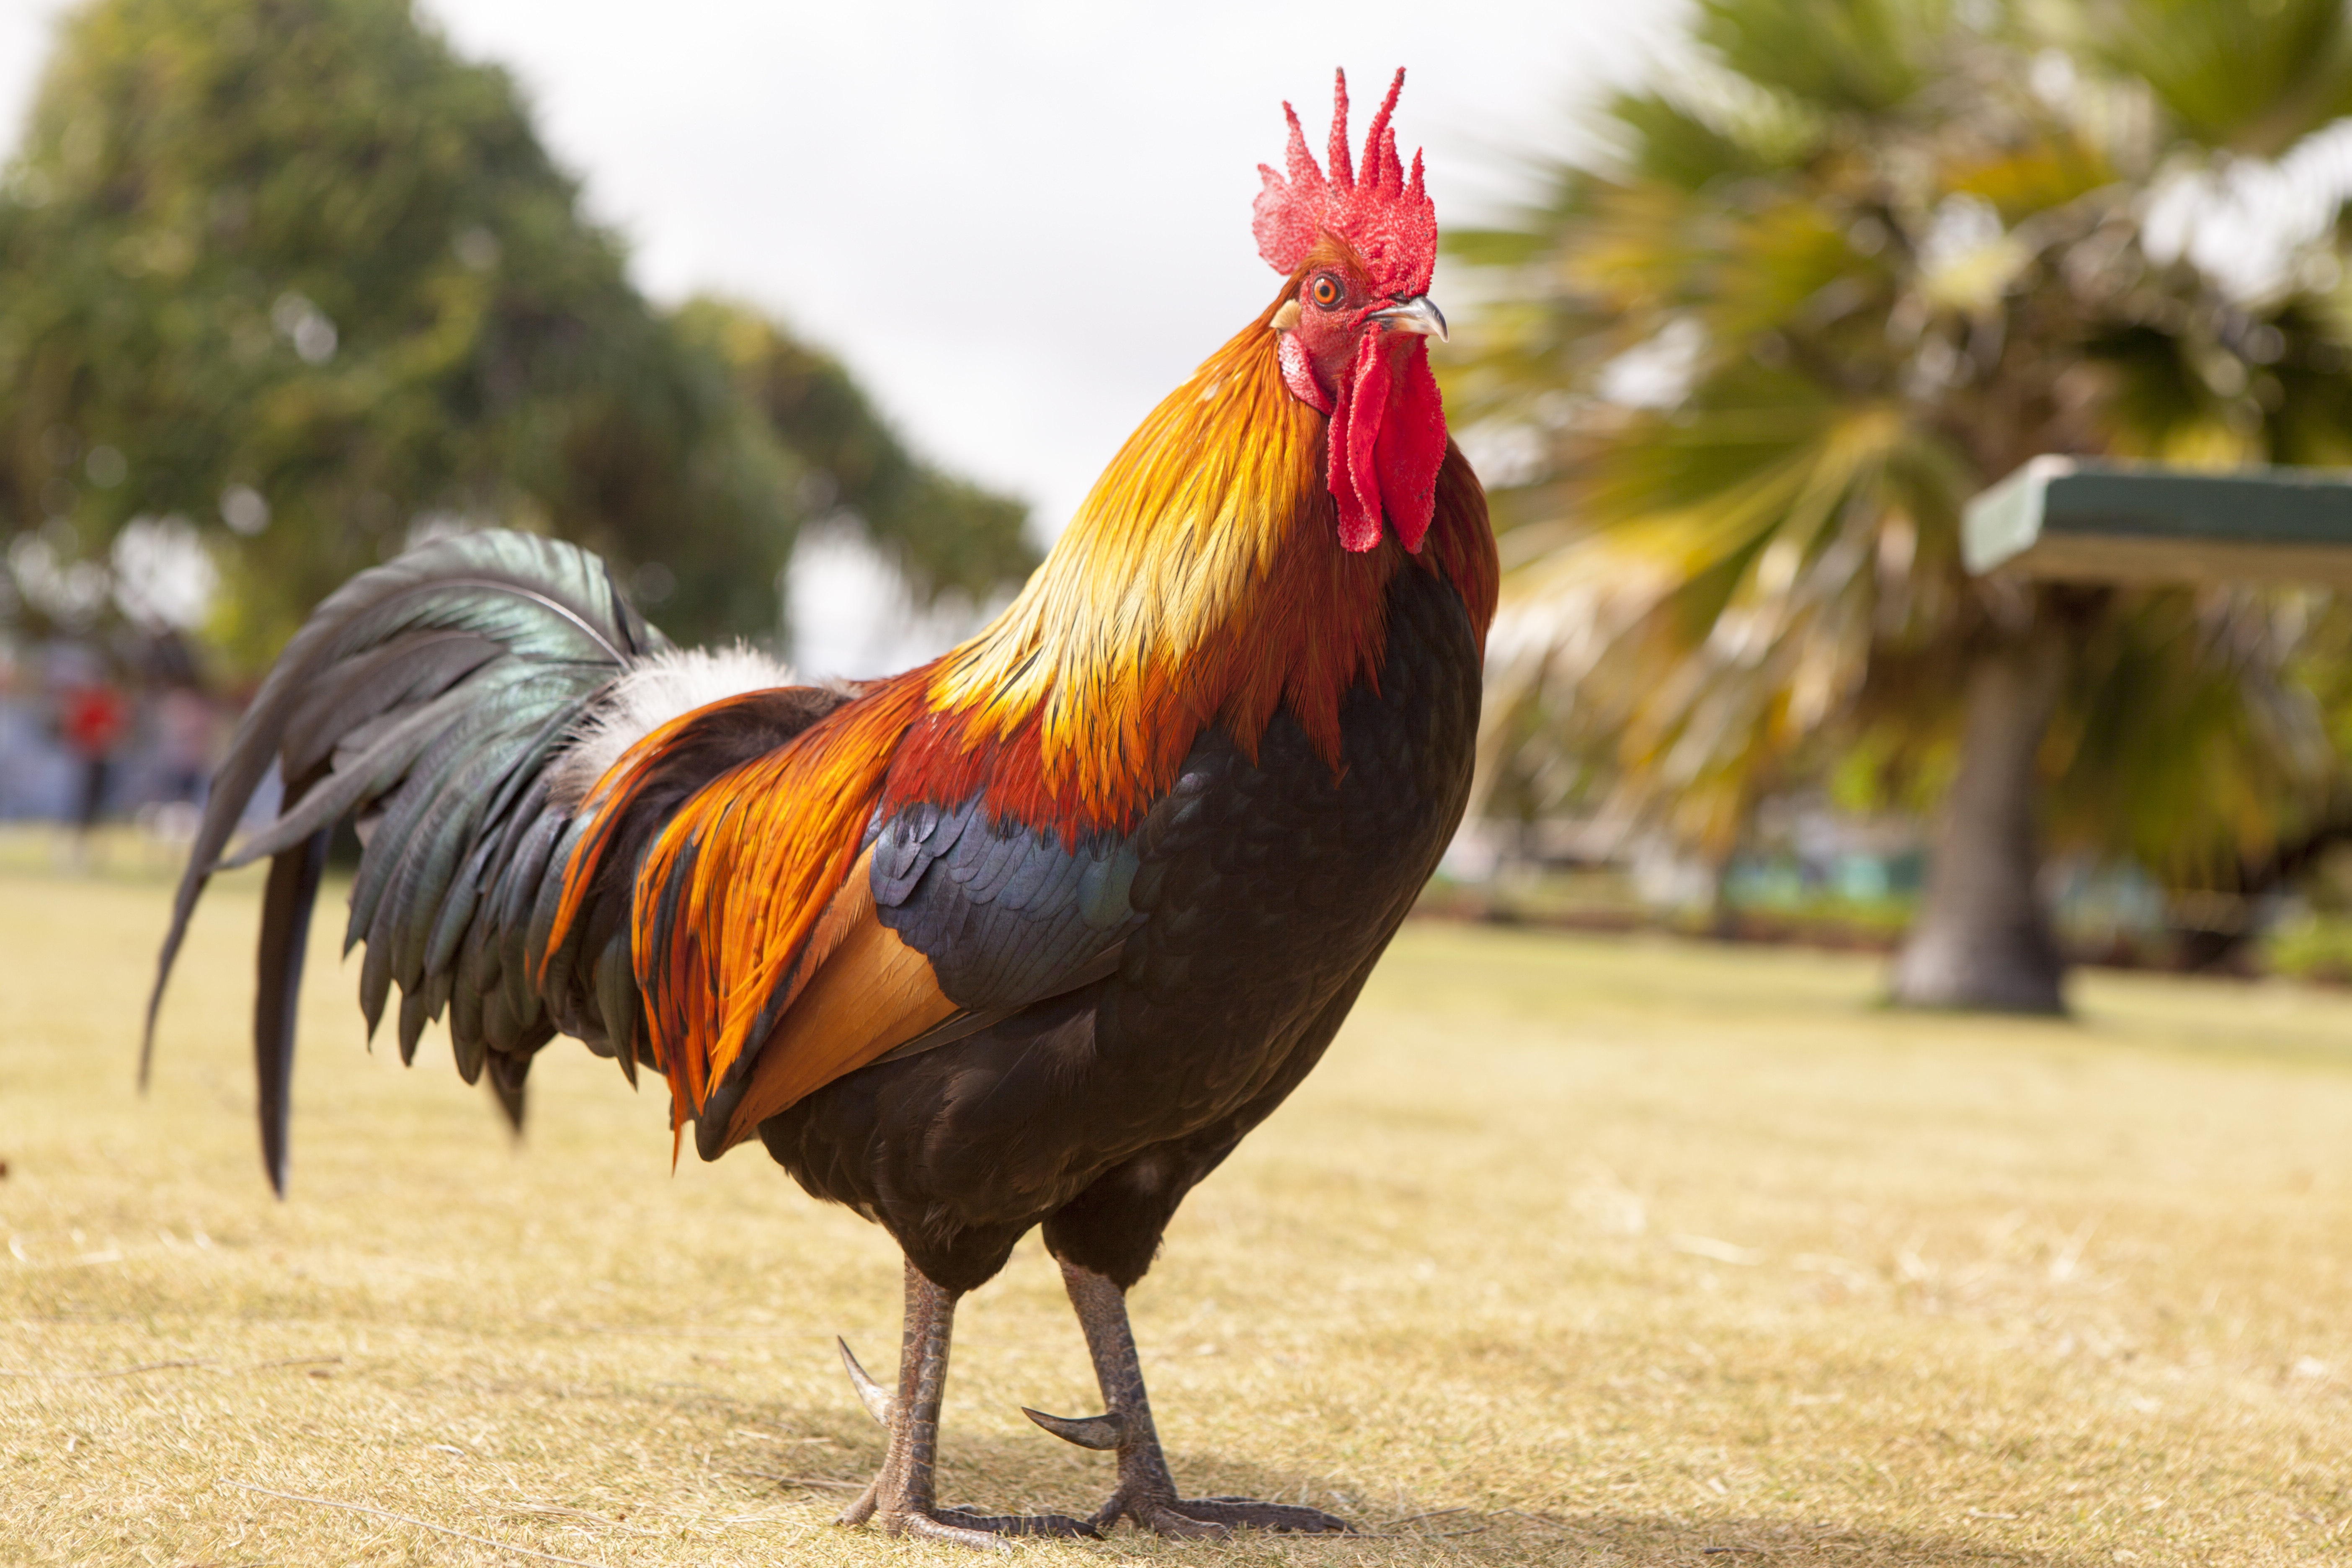 The majestic rooster